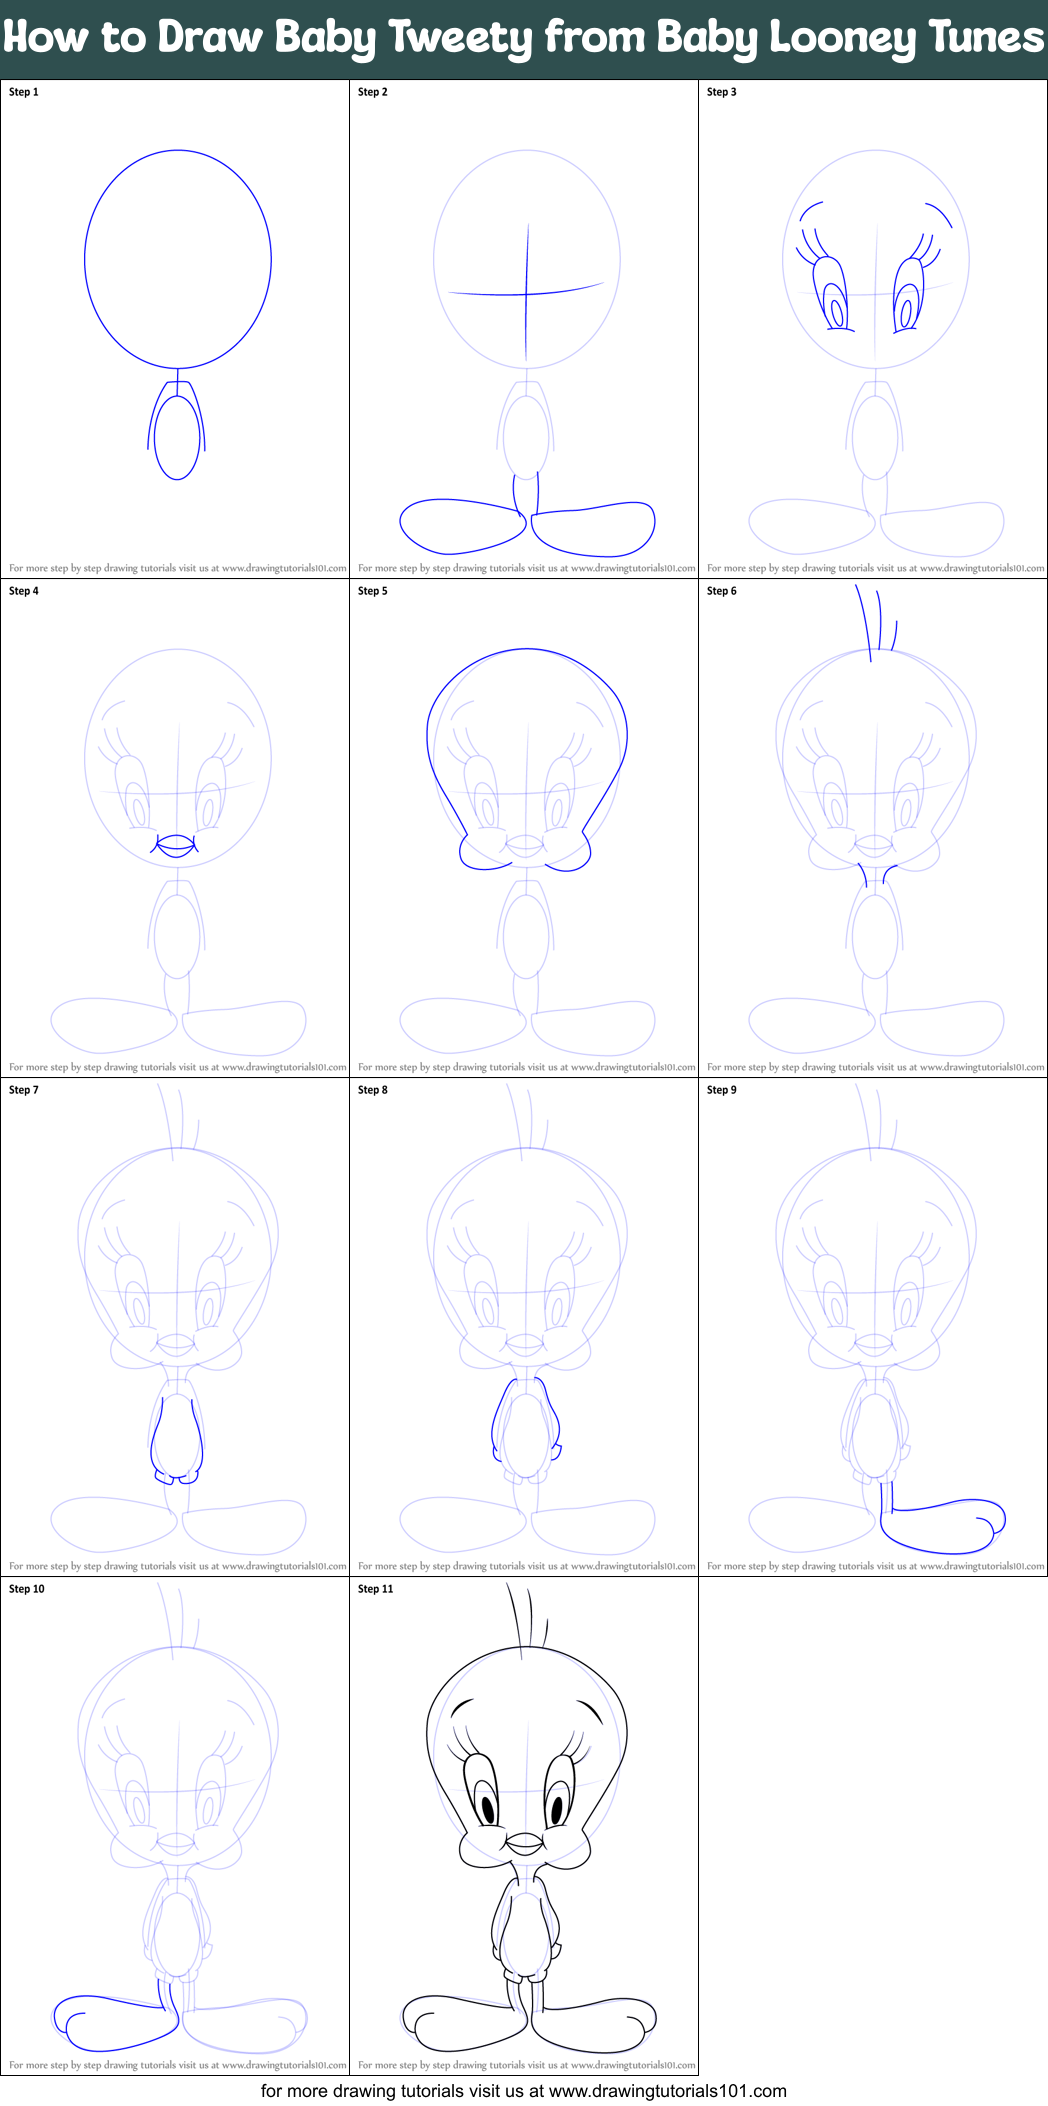 How to Draw Baby Tweety from Baby Looney Tunes printable step by step